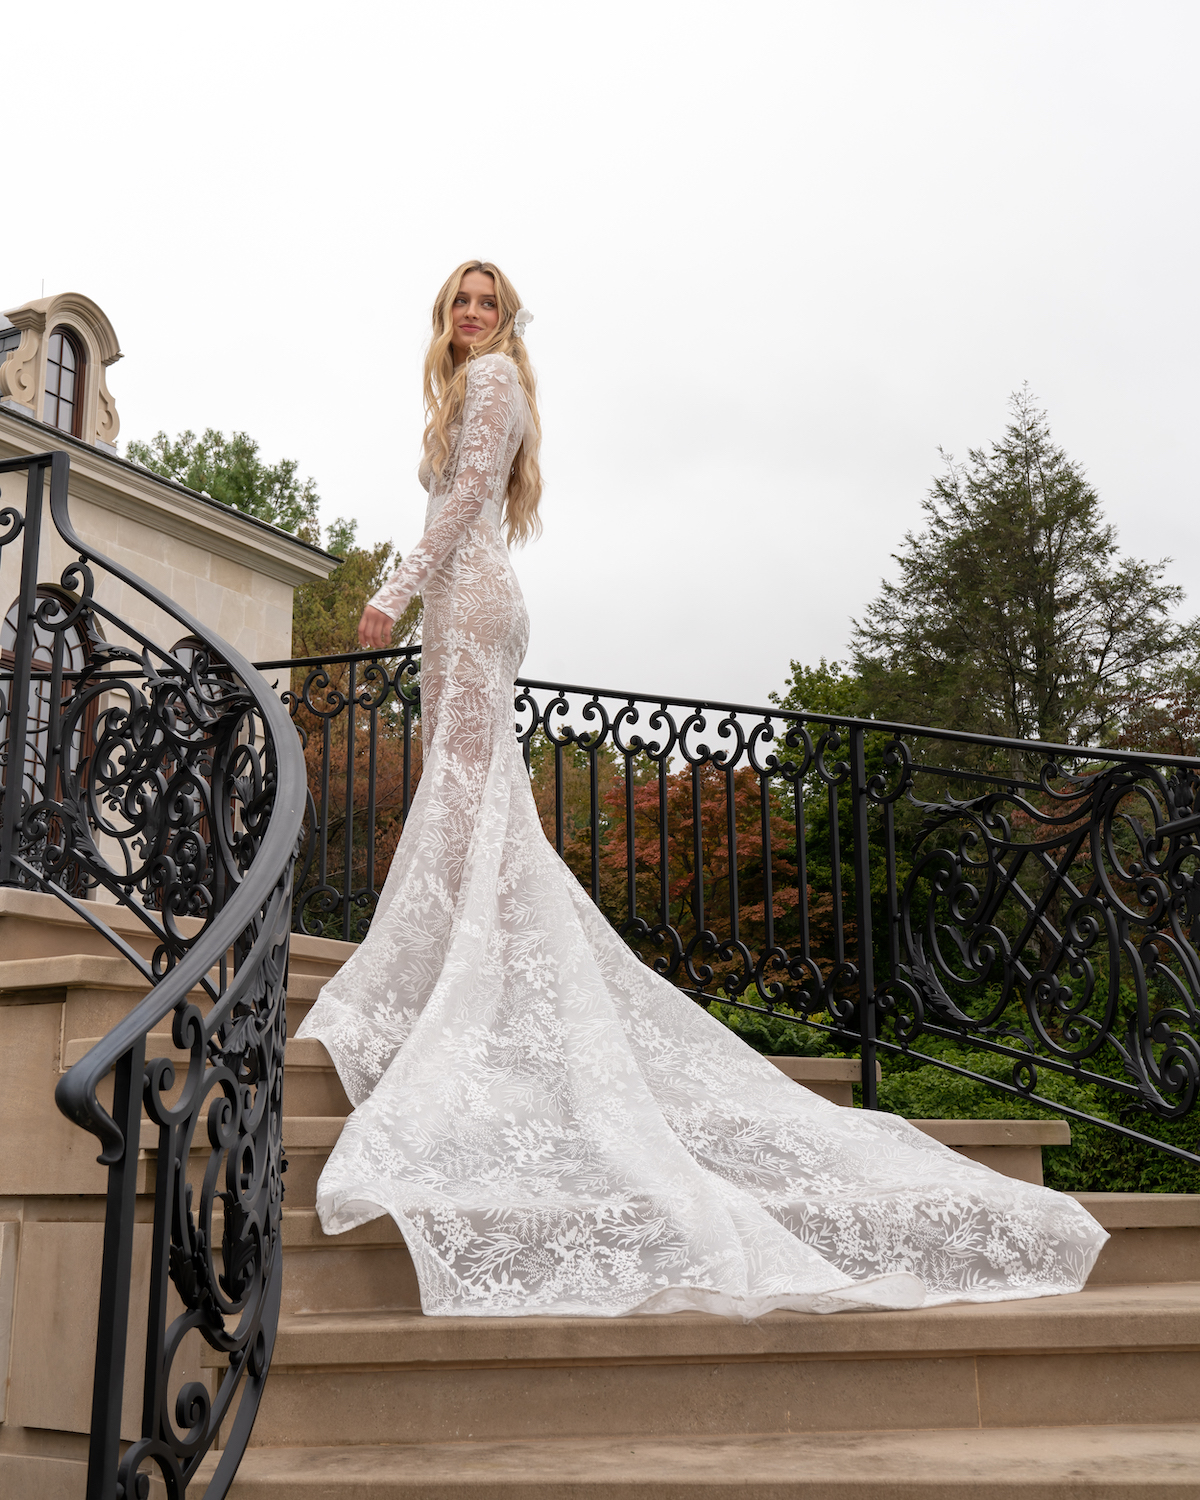 Bride stands on steps in trumpet bridal gown with lace sleeves by Reem Acra